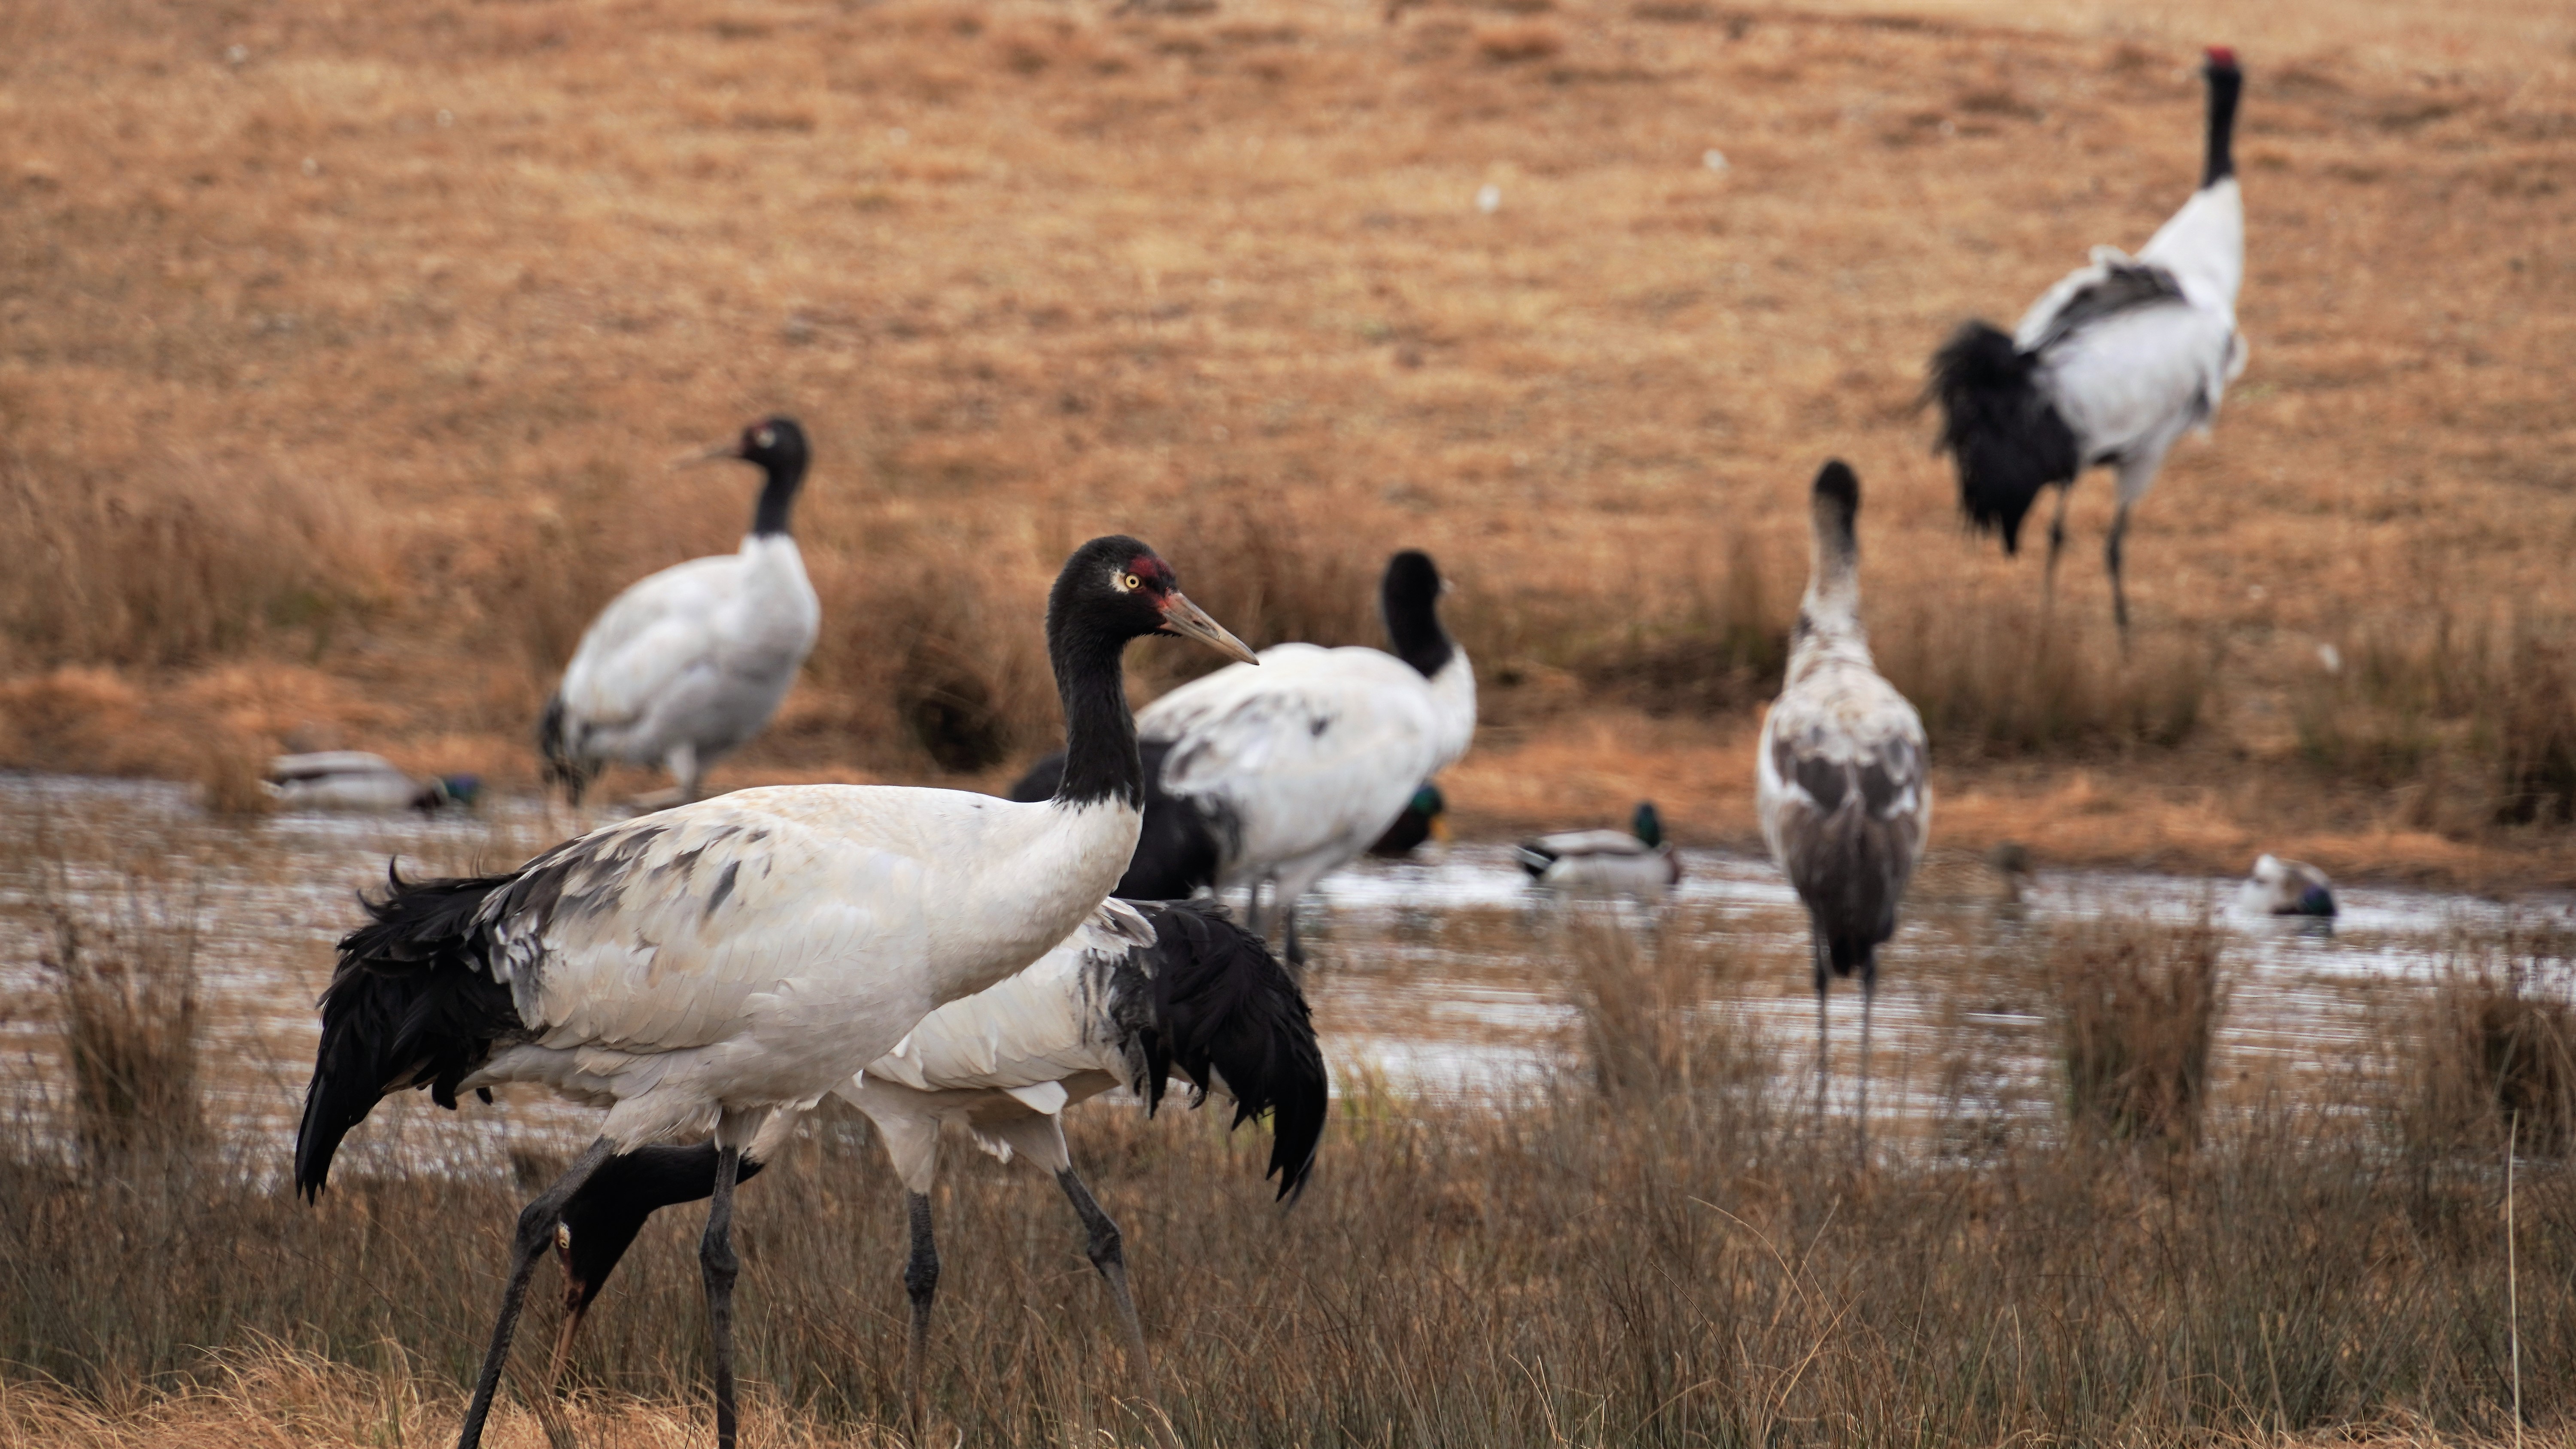 Live: Visiting wintering habitat for black-necked cranes in SW China